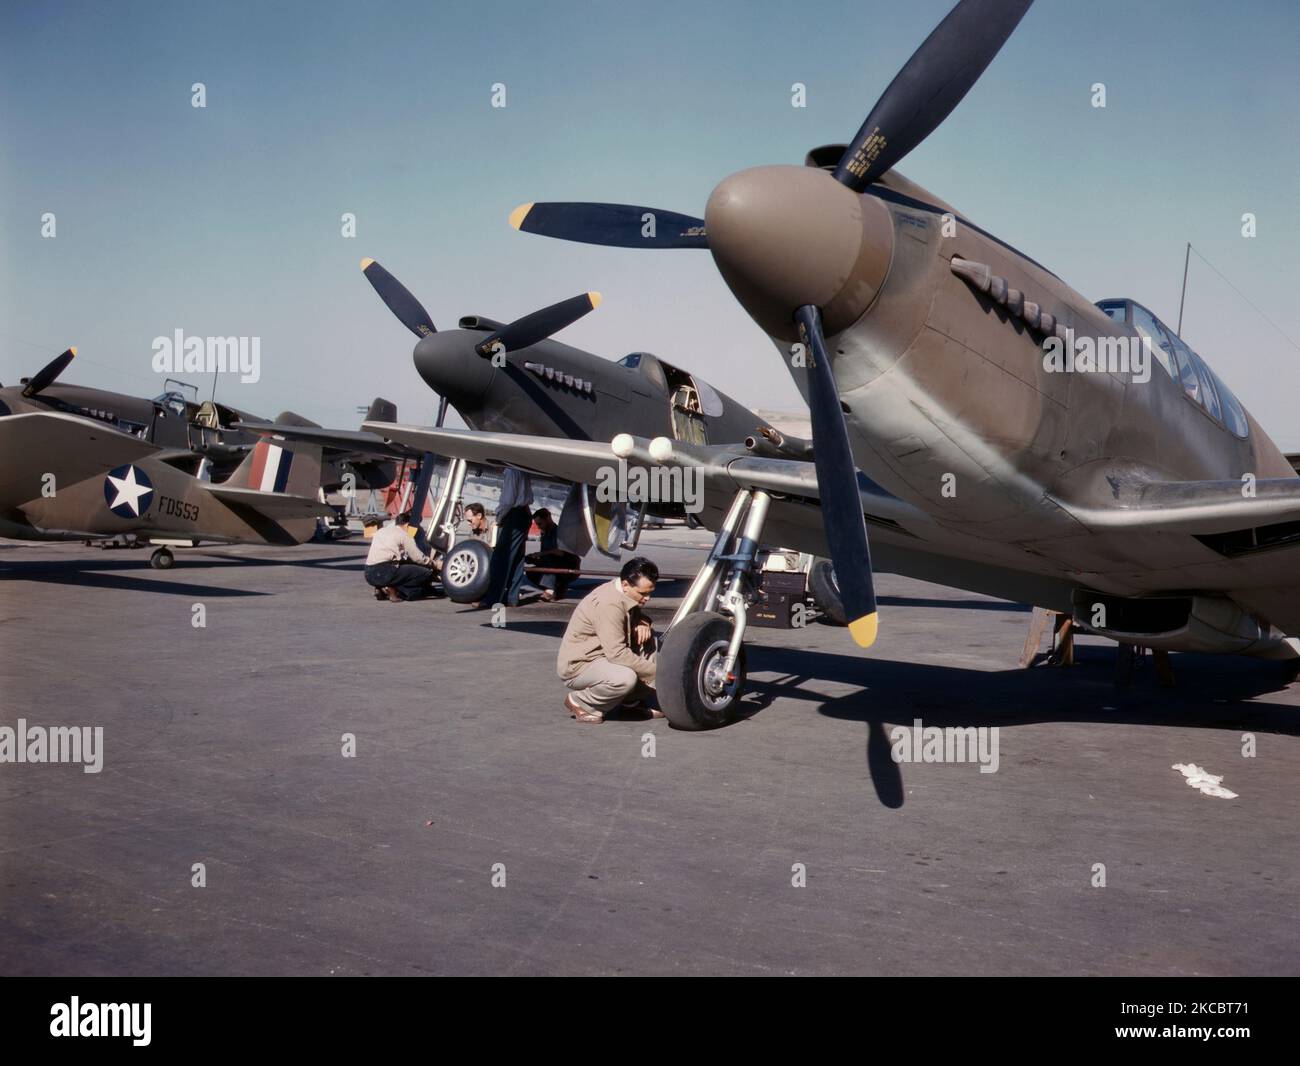 P-51 Mustang fighter planes being prepared for test flight during World War II, 1942. Stock Photo